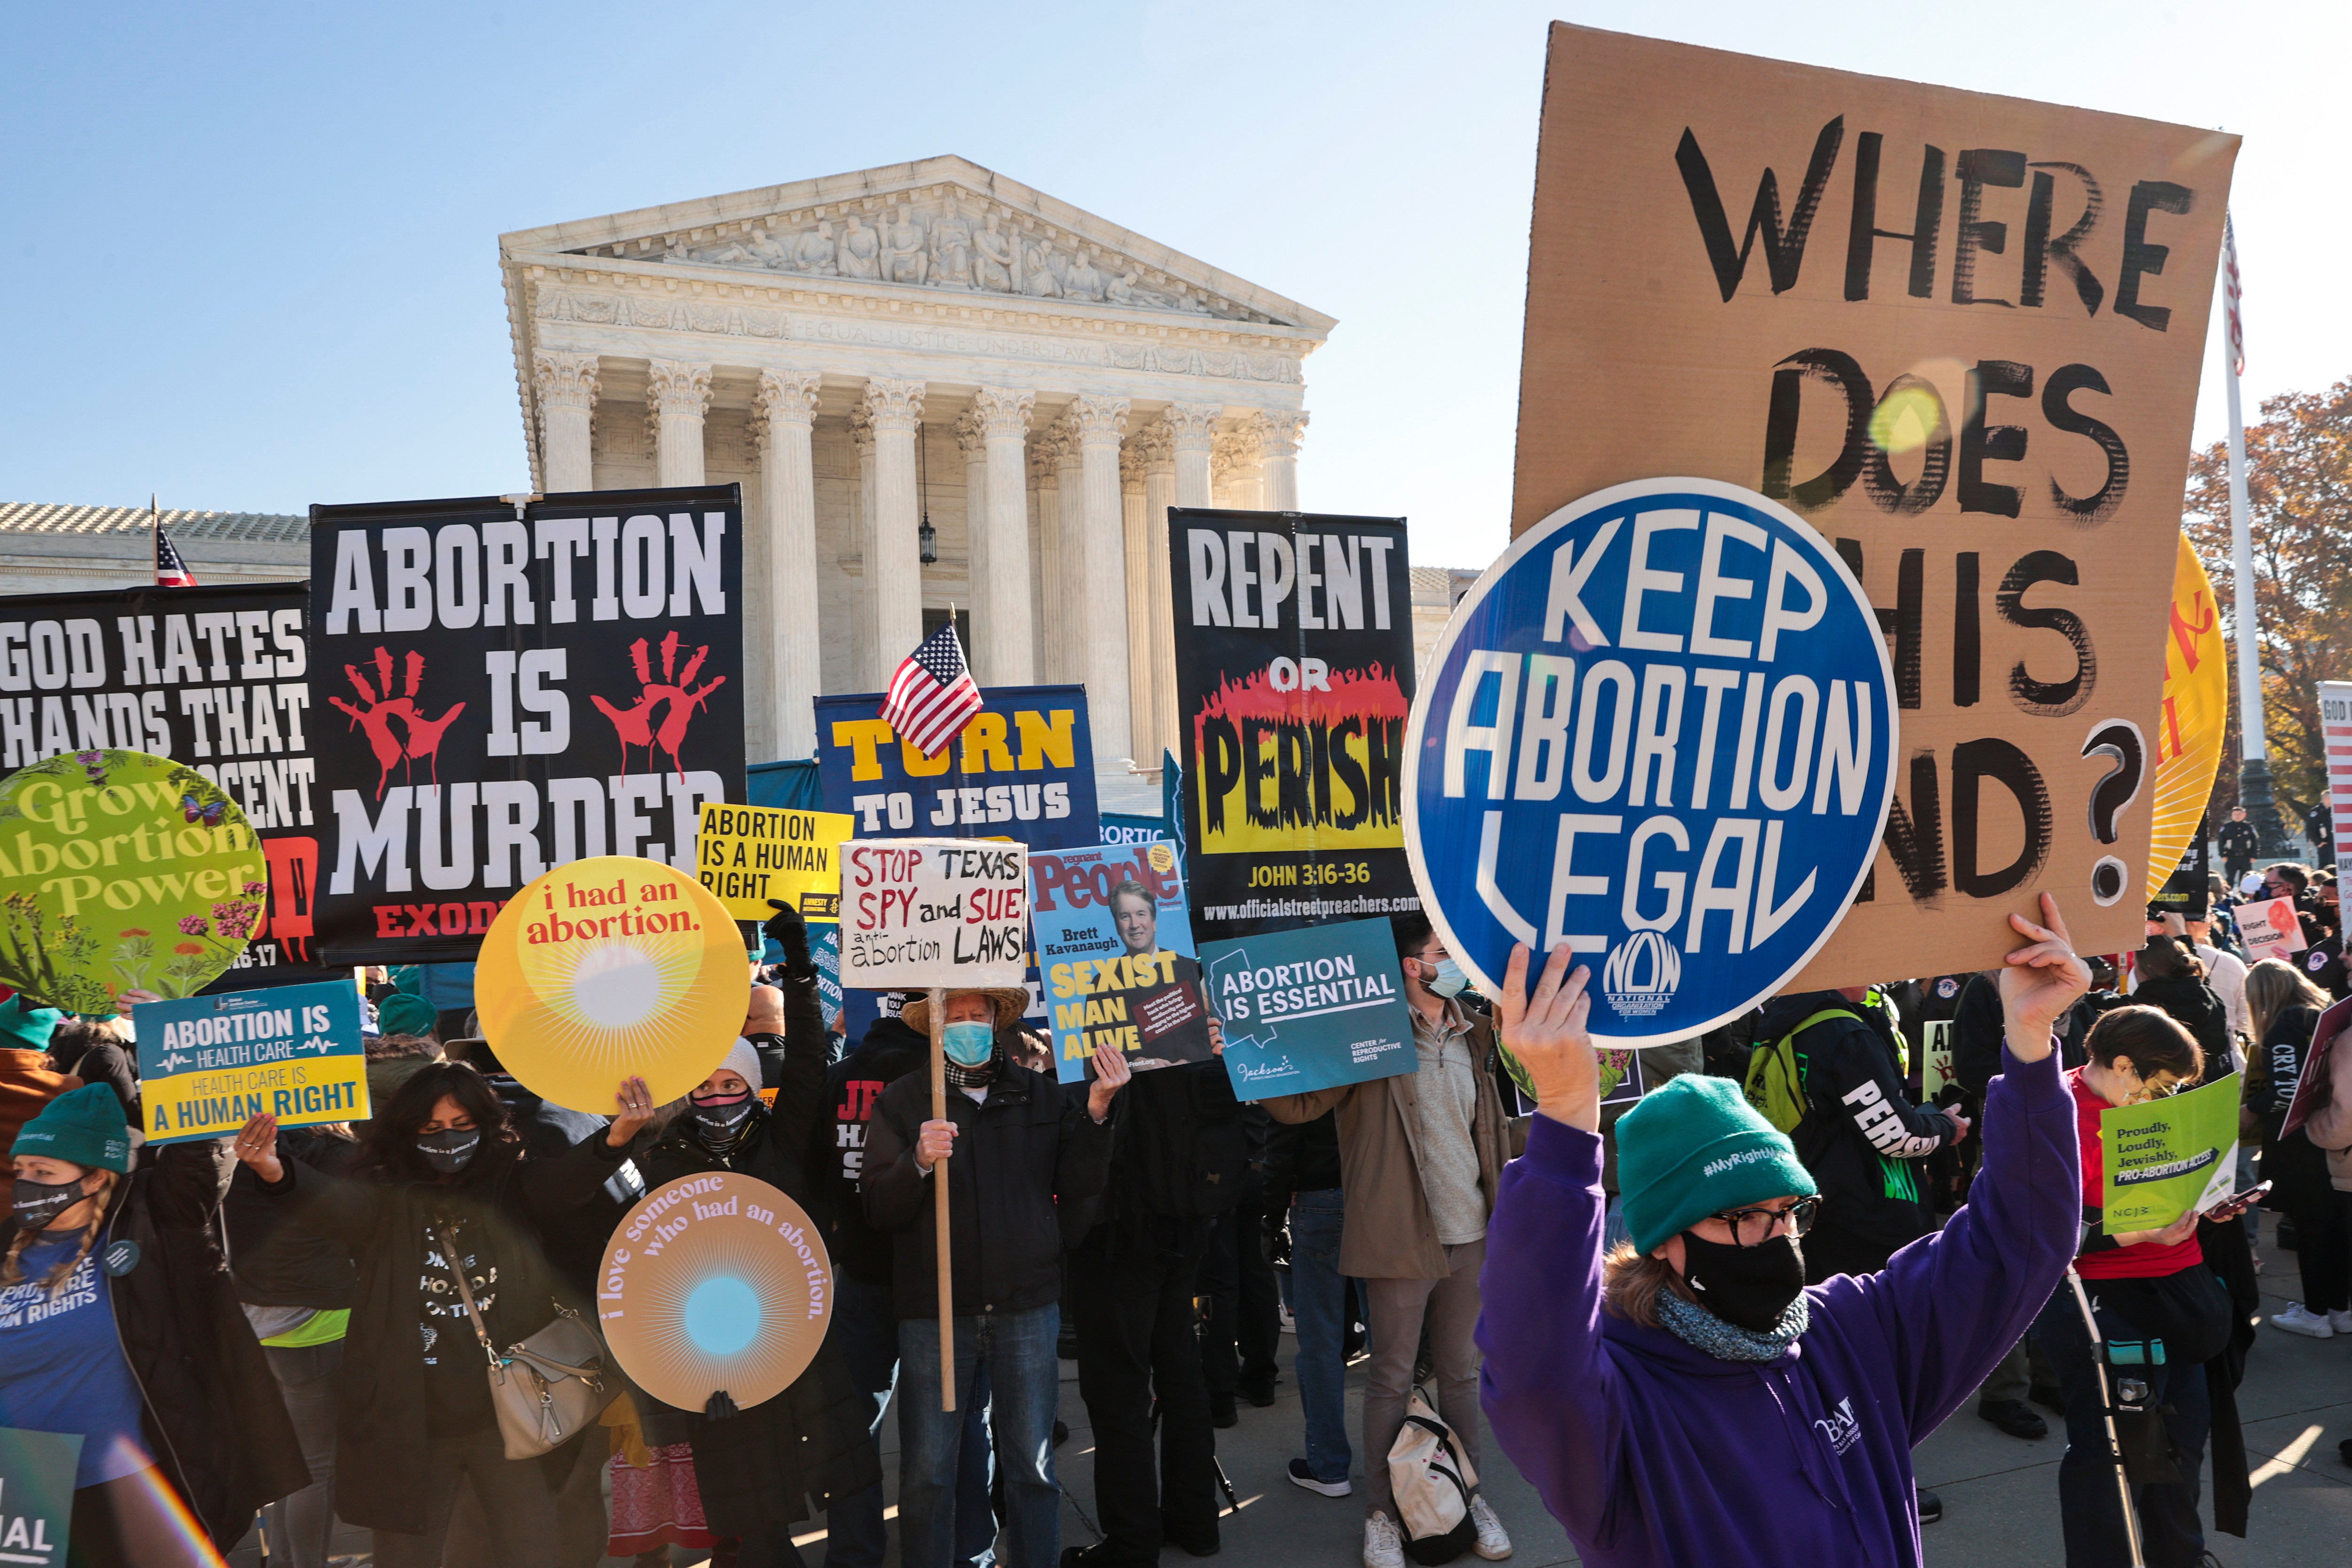 Demonstrators gather in front of the U.S. Supreme Court as the justices hear arguments in Dobbs v. Jackson Women's Health, a case about a Mississippi law that bans most abortions after 15 weeks, on December 1, 2021 in Washington, D.C.